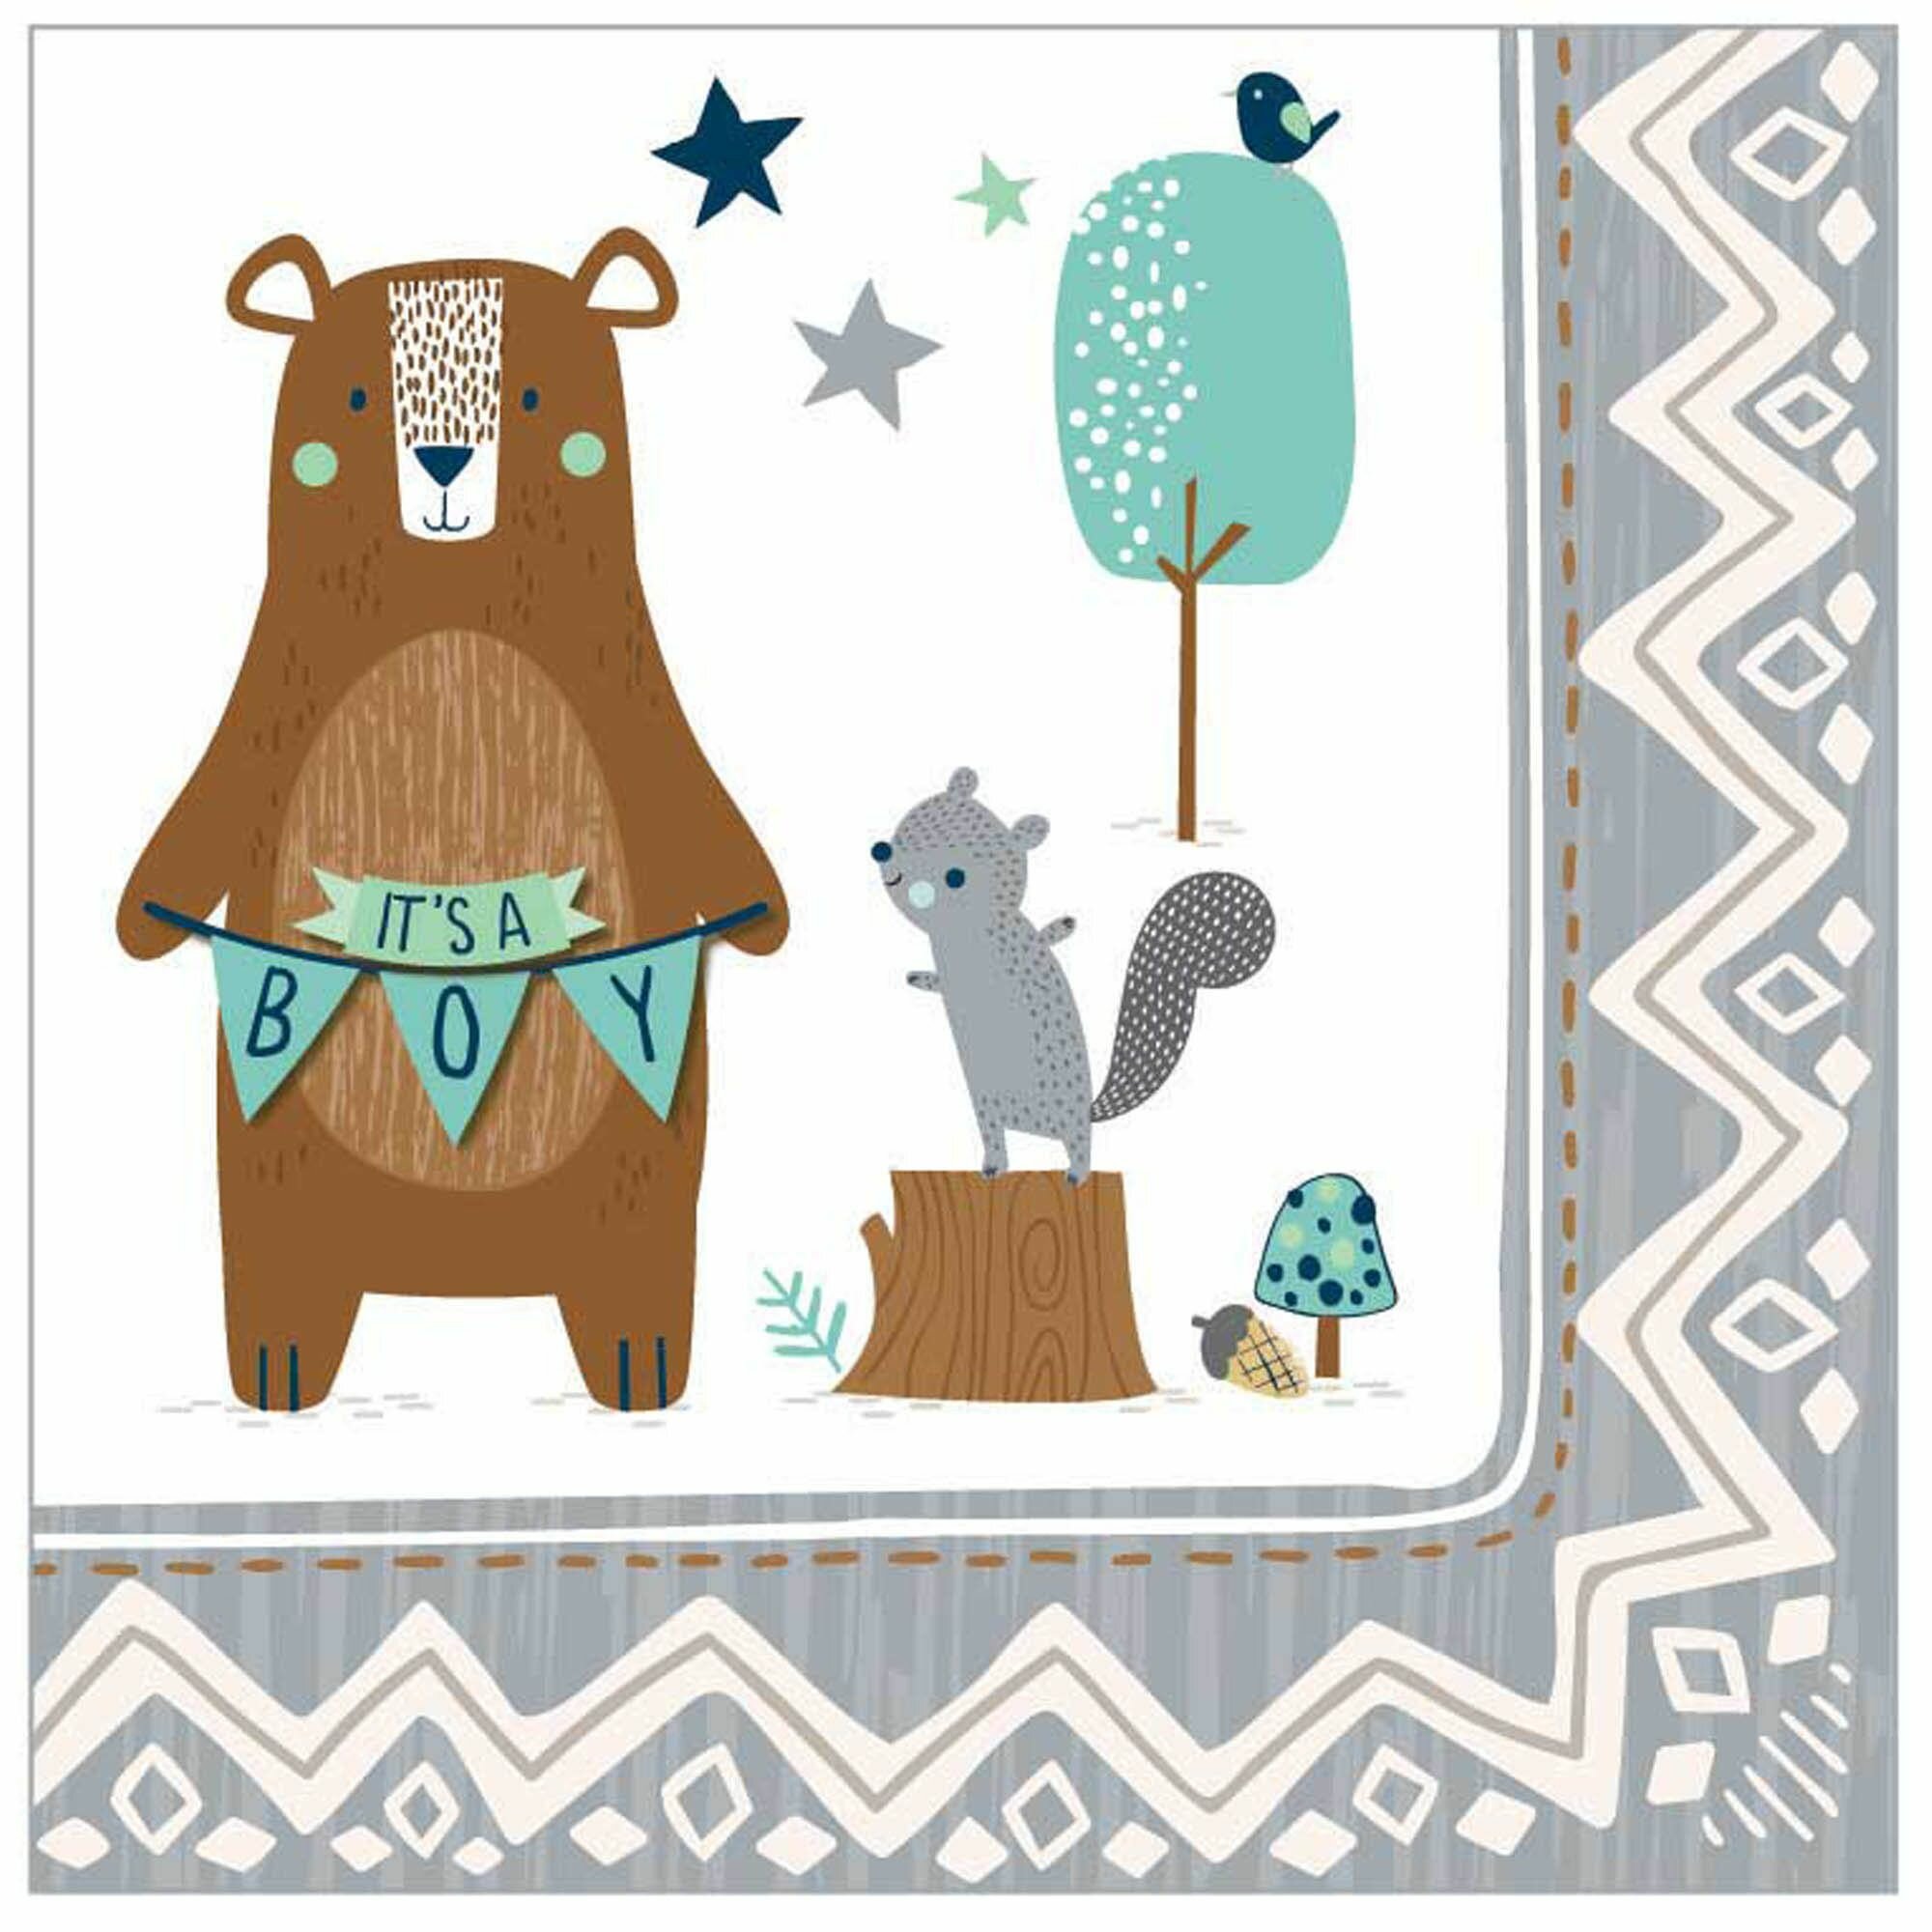 we can bearly wait baby shower